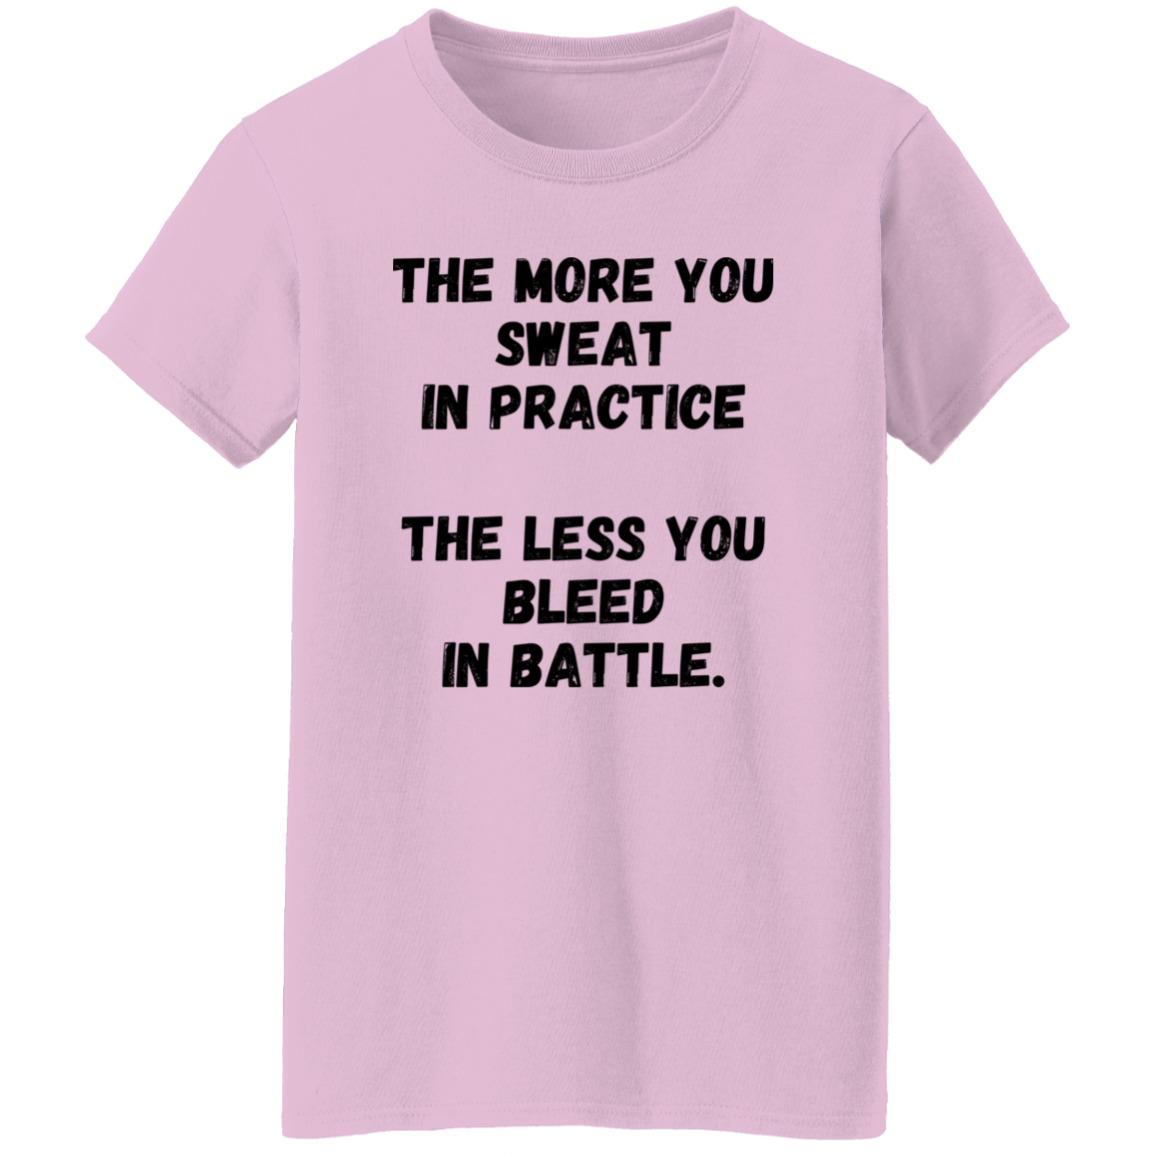 The More You Sweat In Practice, The Less You Bleed In Battle -  Women's, Ladies' T-Shirt